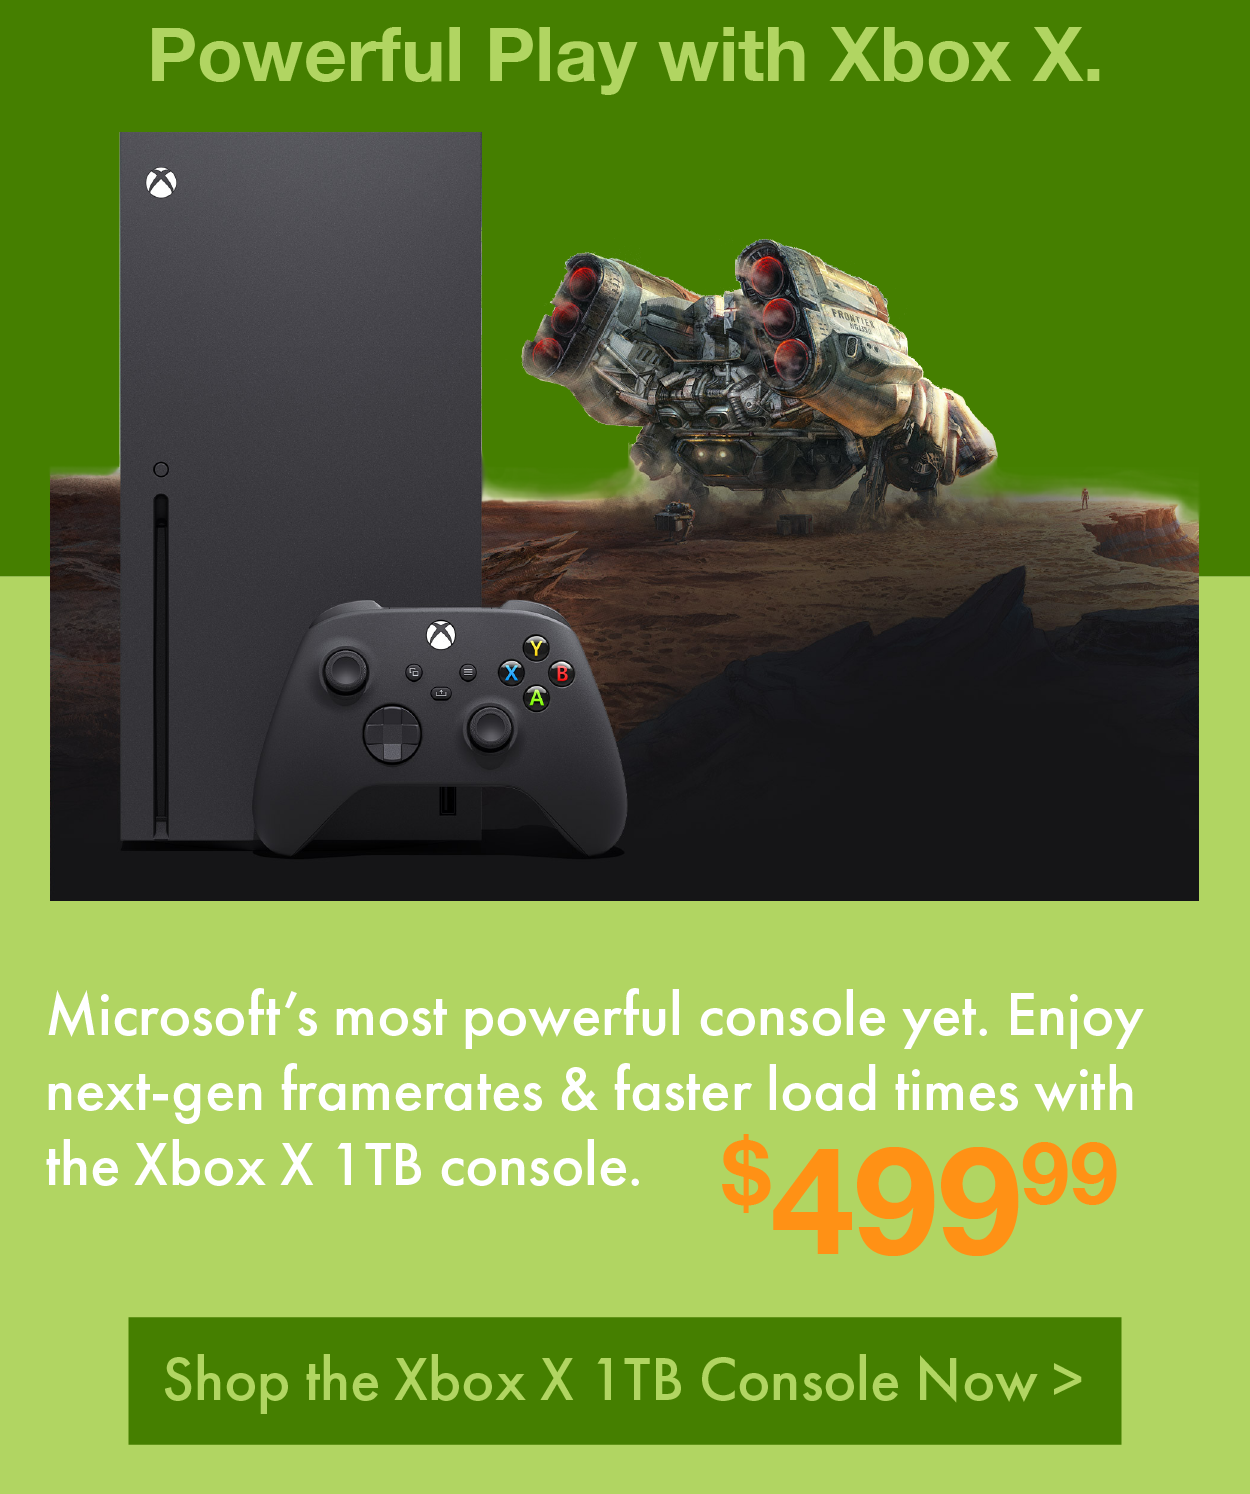 Powerful Play with Xbox X. Microsoft’s most powerful console yet. Enjoy next-gen framerates & faster load times with the Xbox X 1TB console. Only $499.99